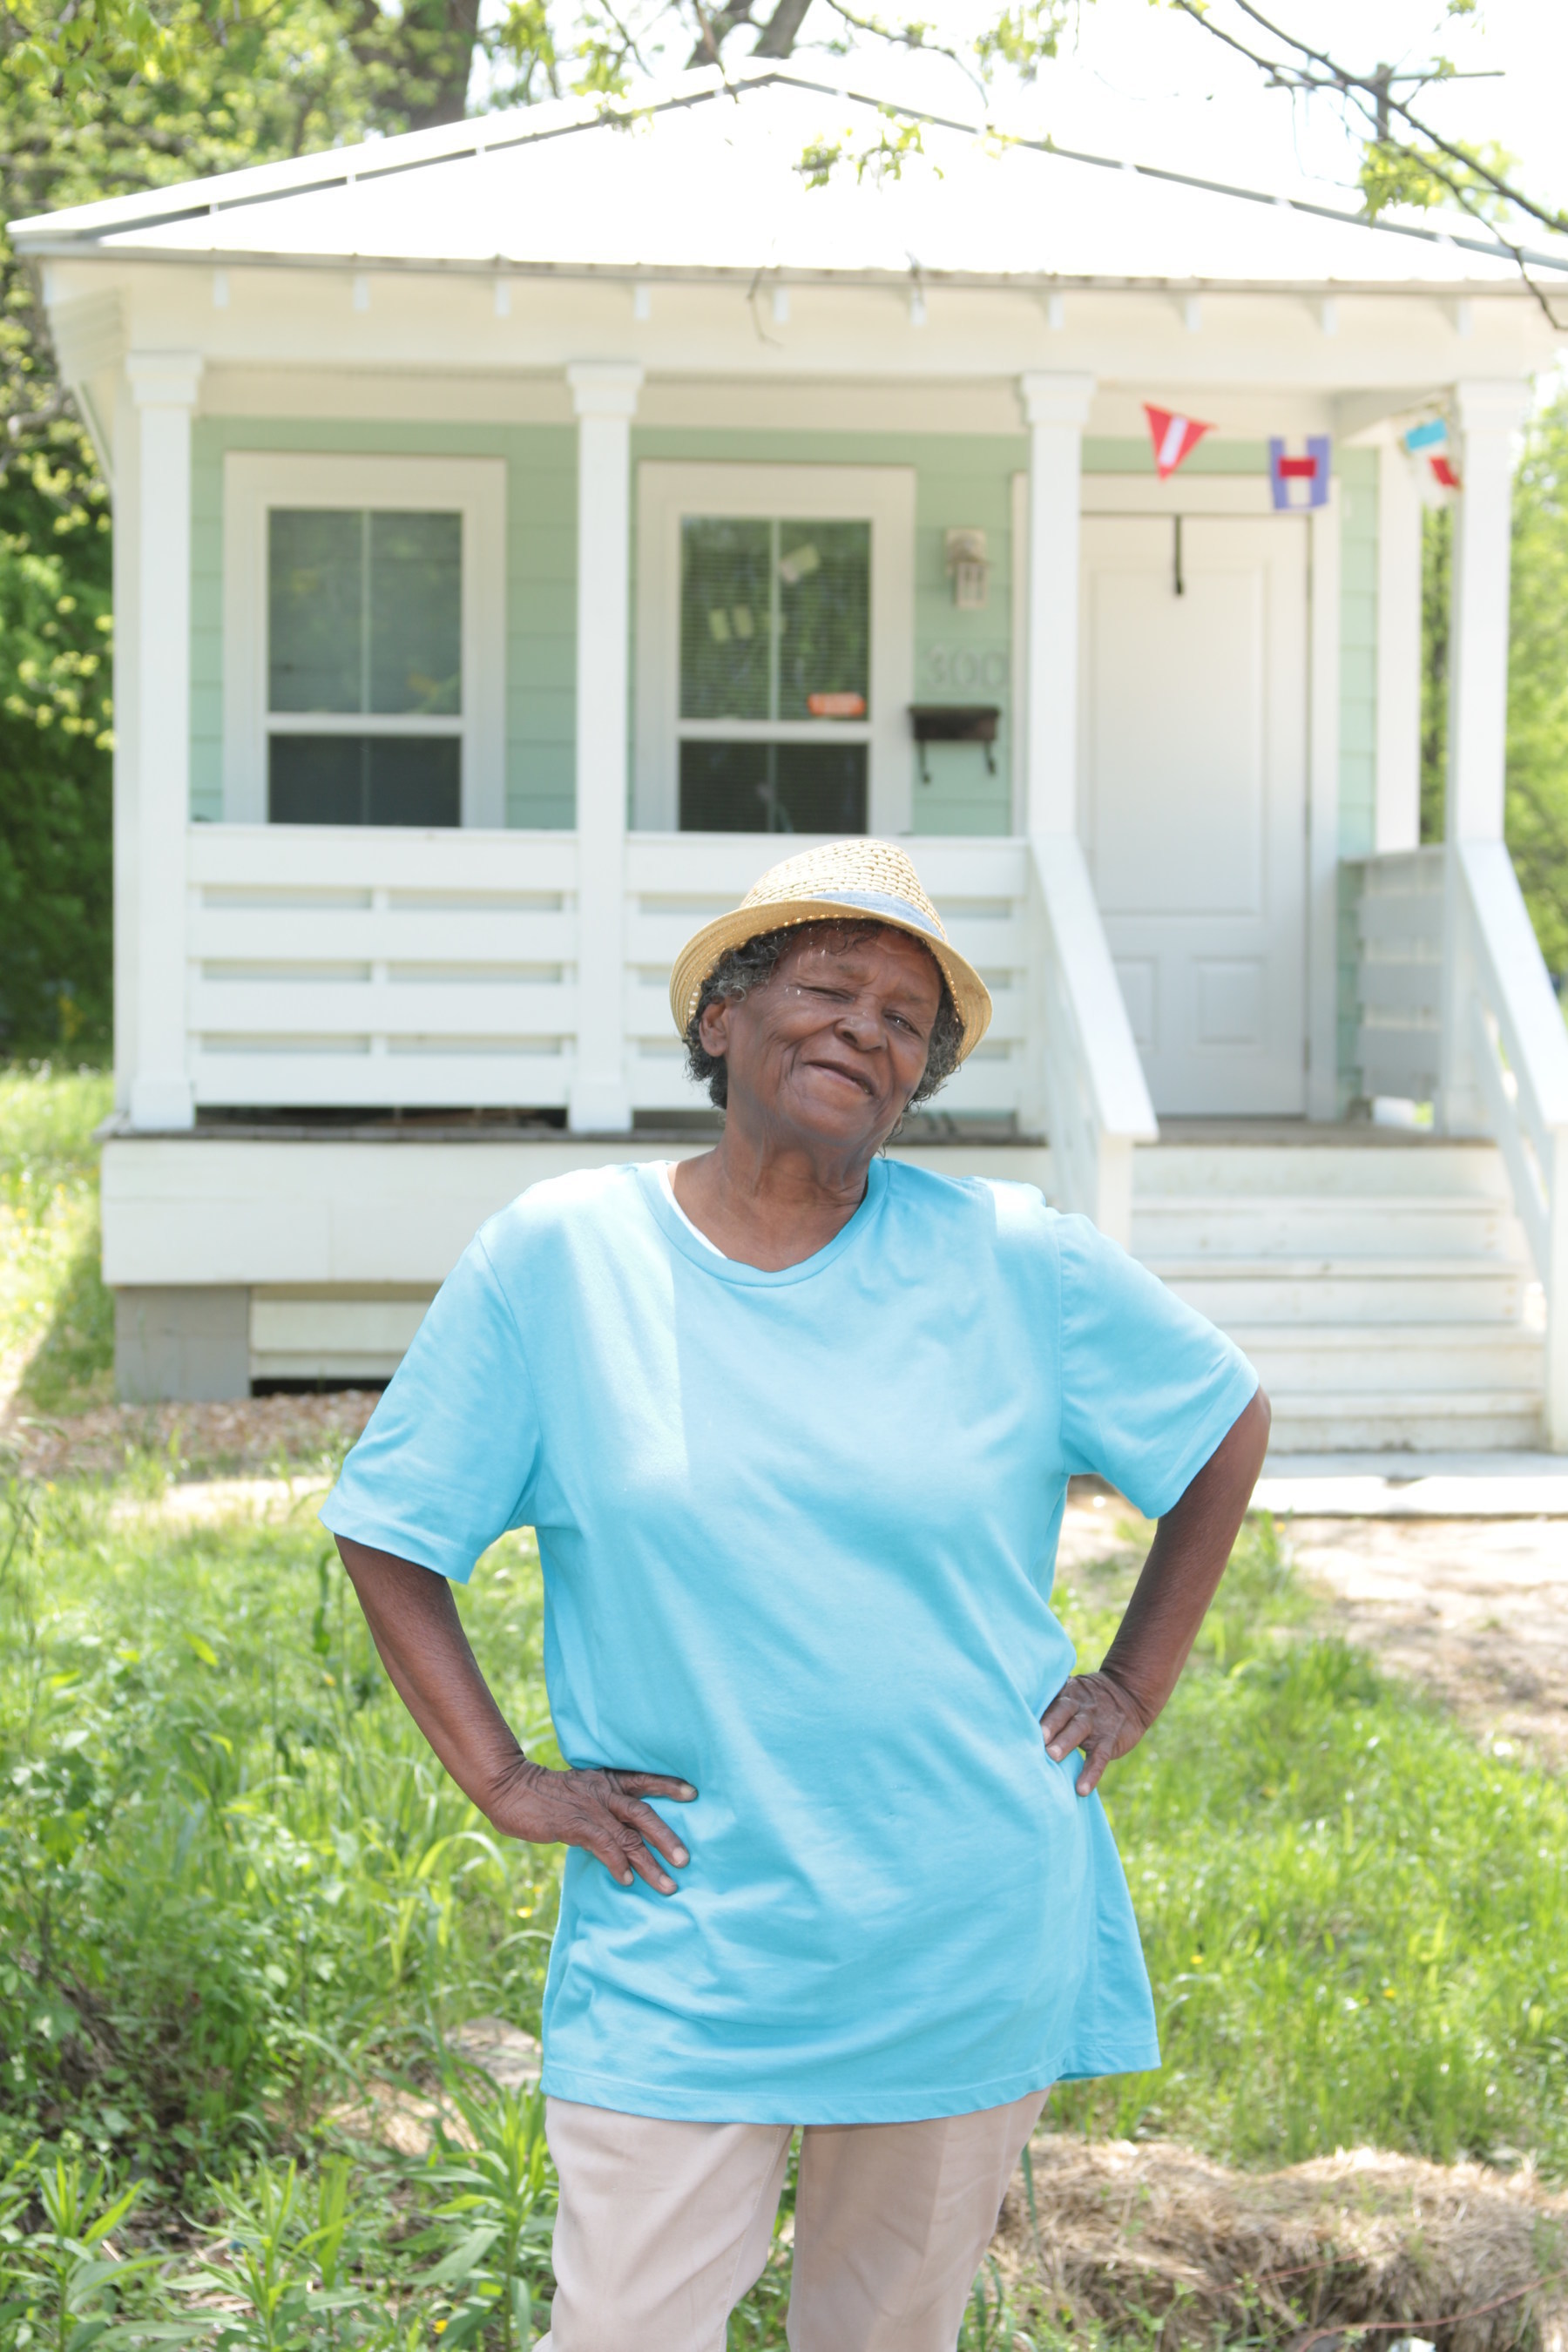 Dorothy Russell, 61, knows you can go home again. She was awarded a Homebuyer Equity Leverage Partnership grant from Planters Bank & Trust Company and FHLB Dallas which was put toward her down payment on her new home. Her new home is located on the same lot of her childhood home.